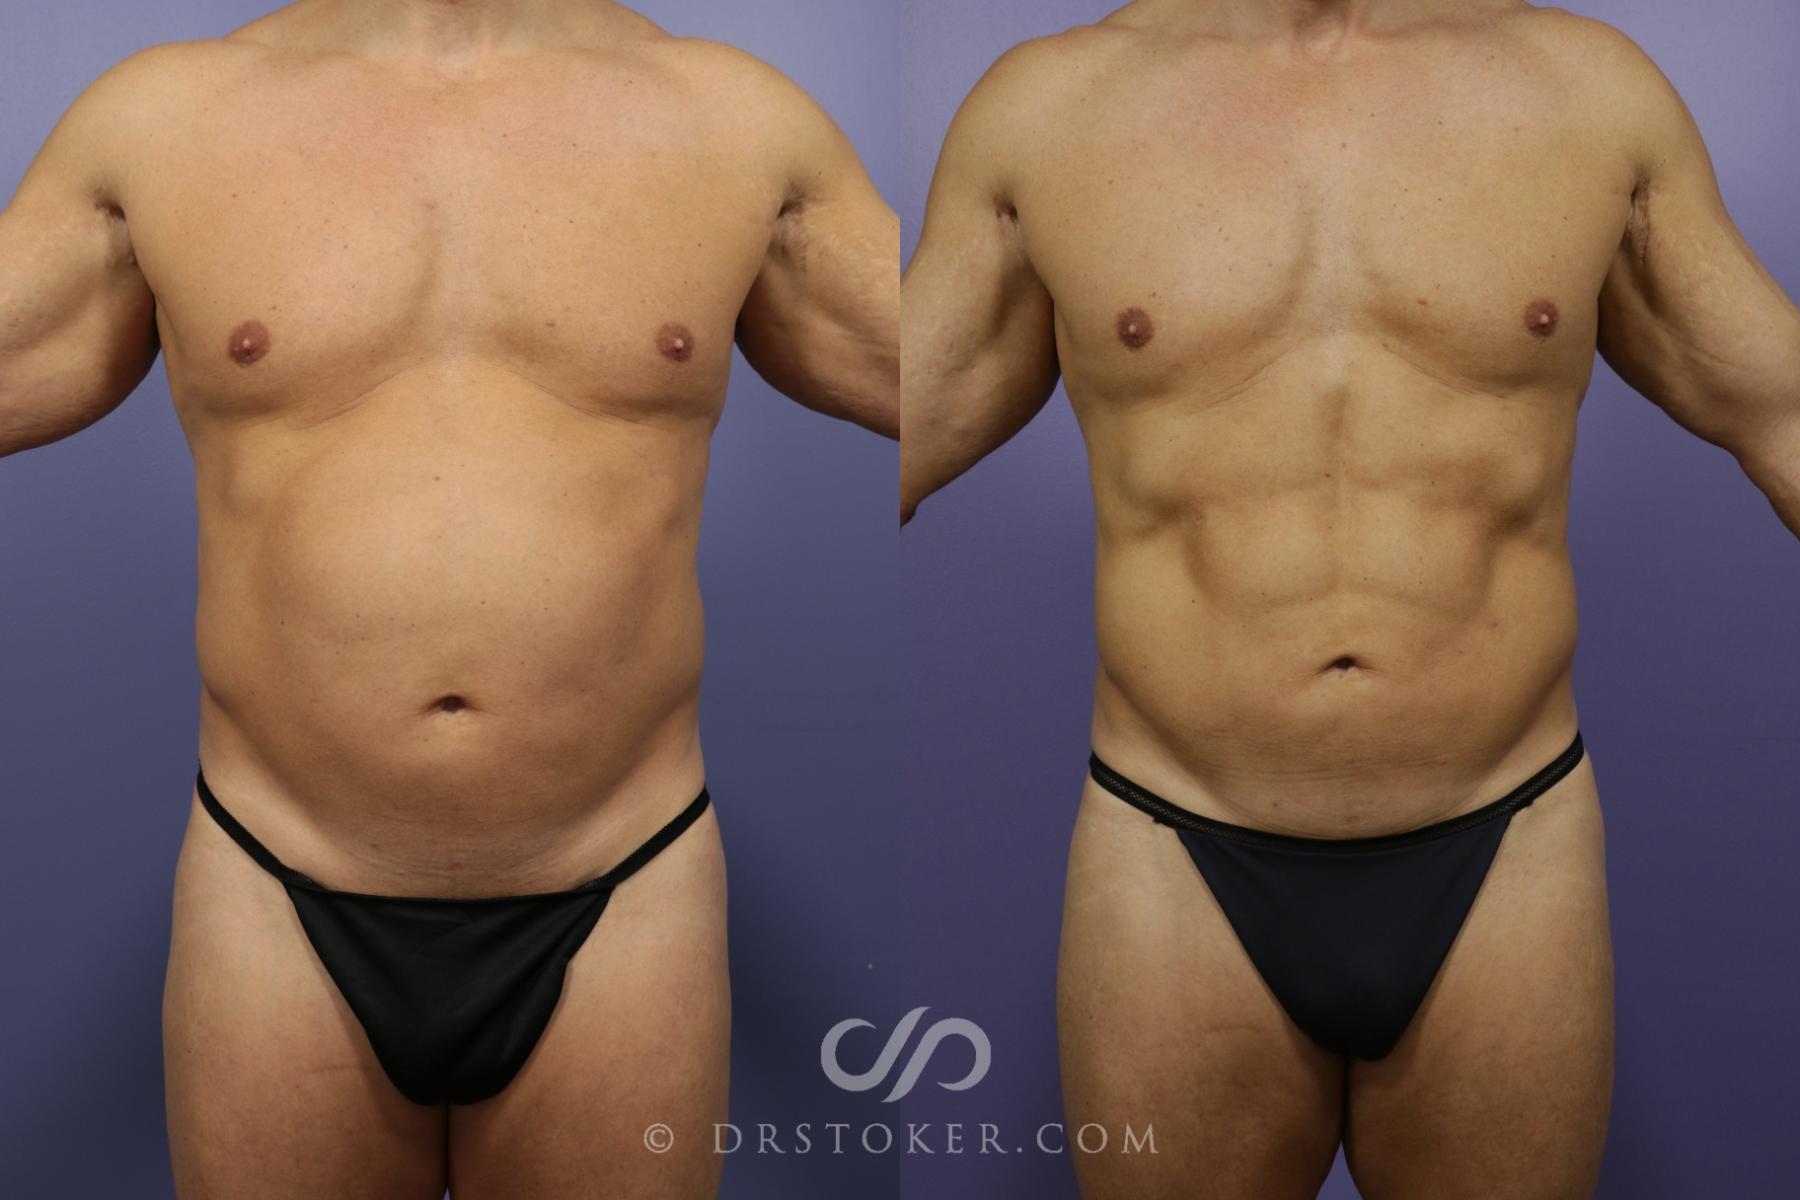 Liposuction - Abdominal Etching & Sculpting Before and After Photo Gallery, Los Angeles, CA